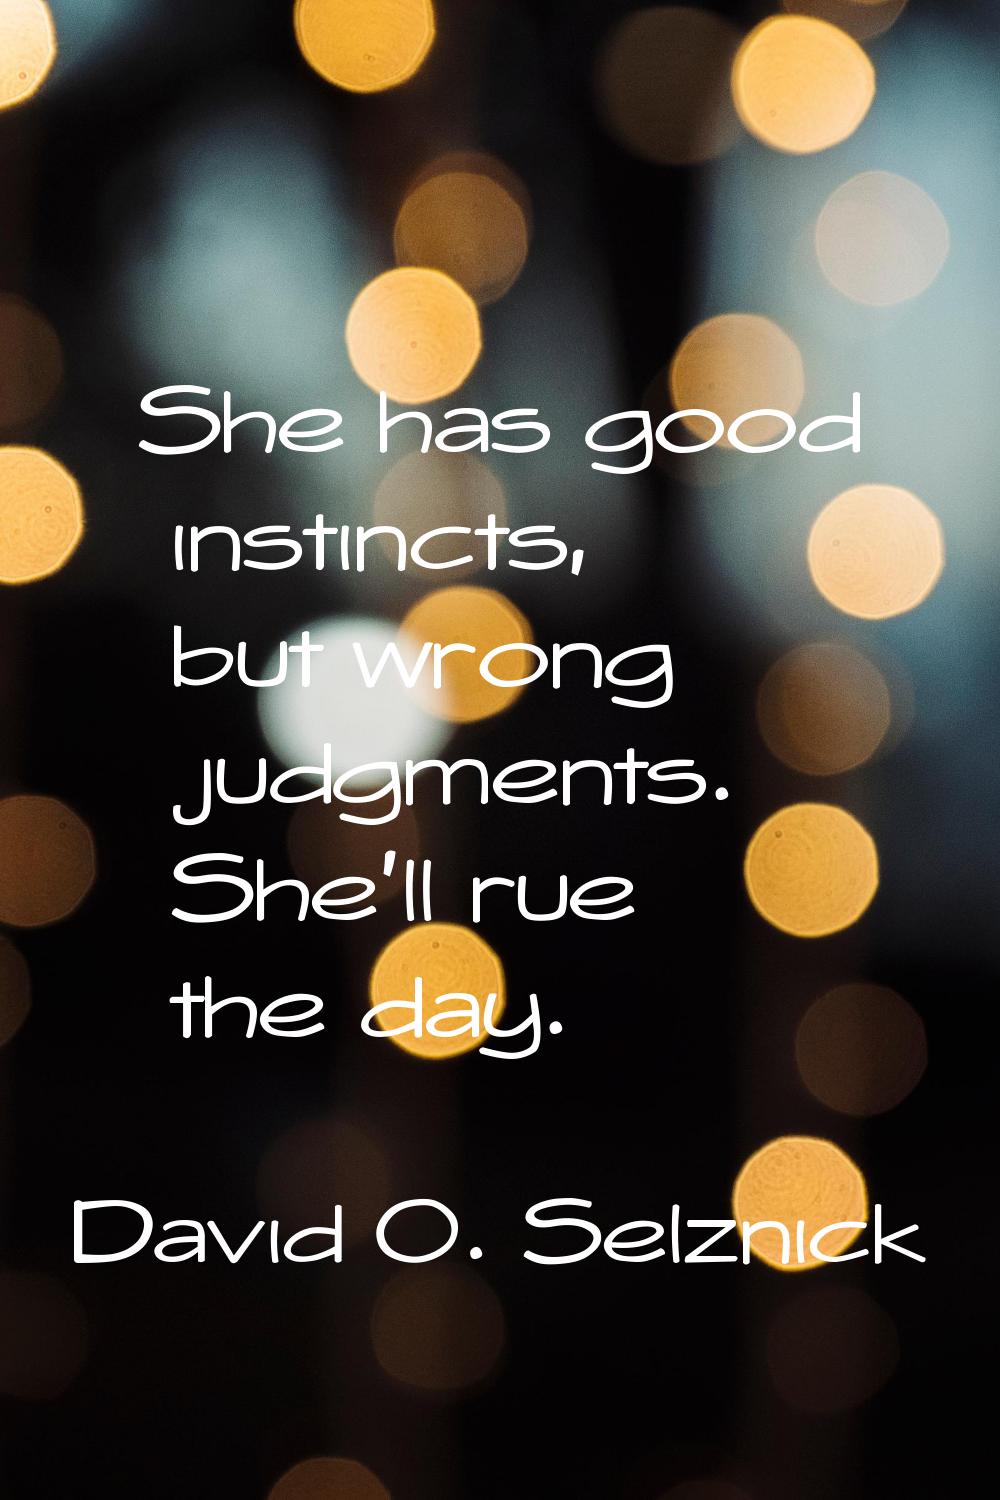 She has good instincts, but wrong judgments. She'll rue the day.